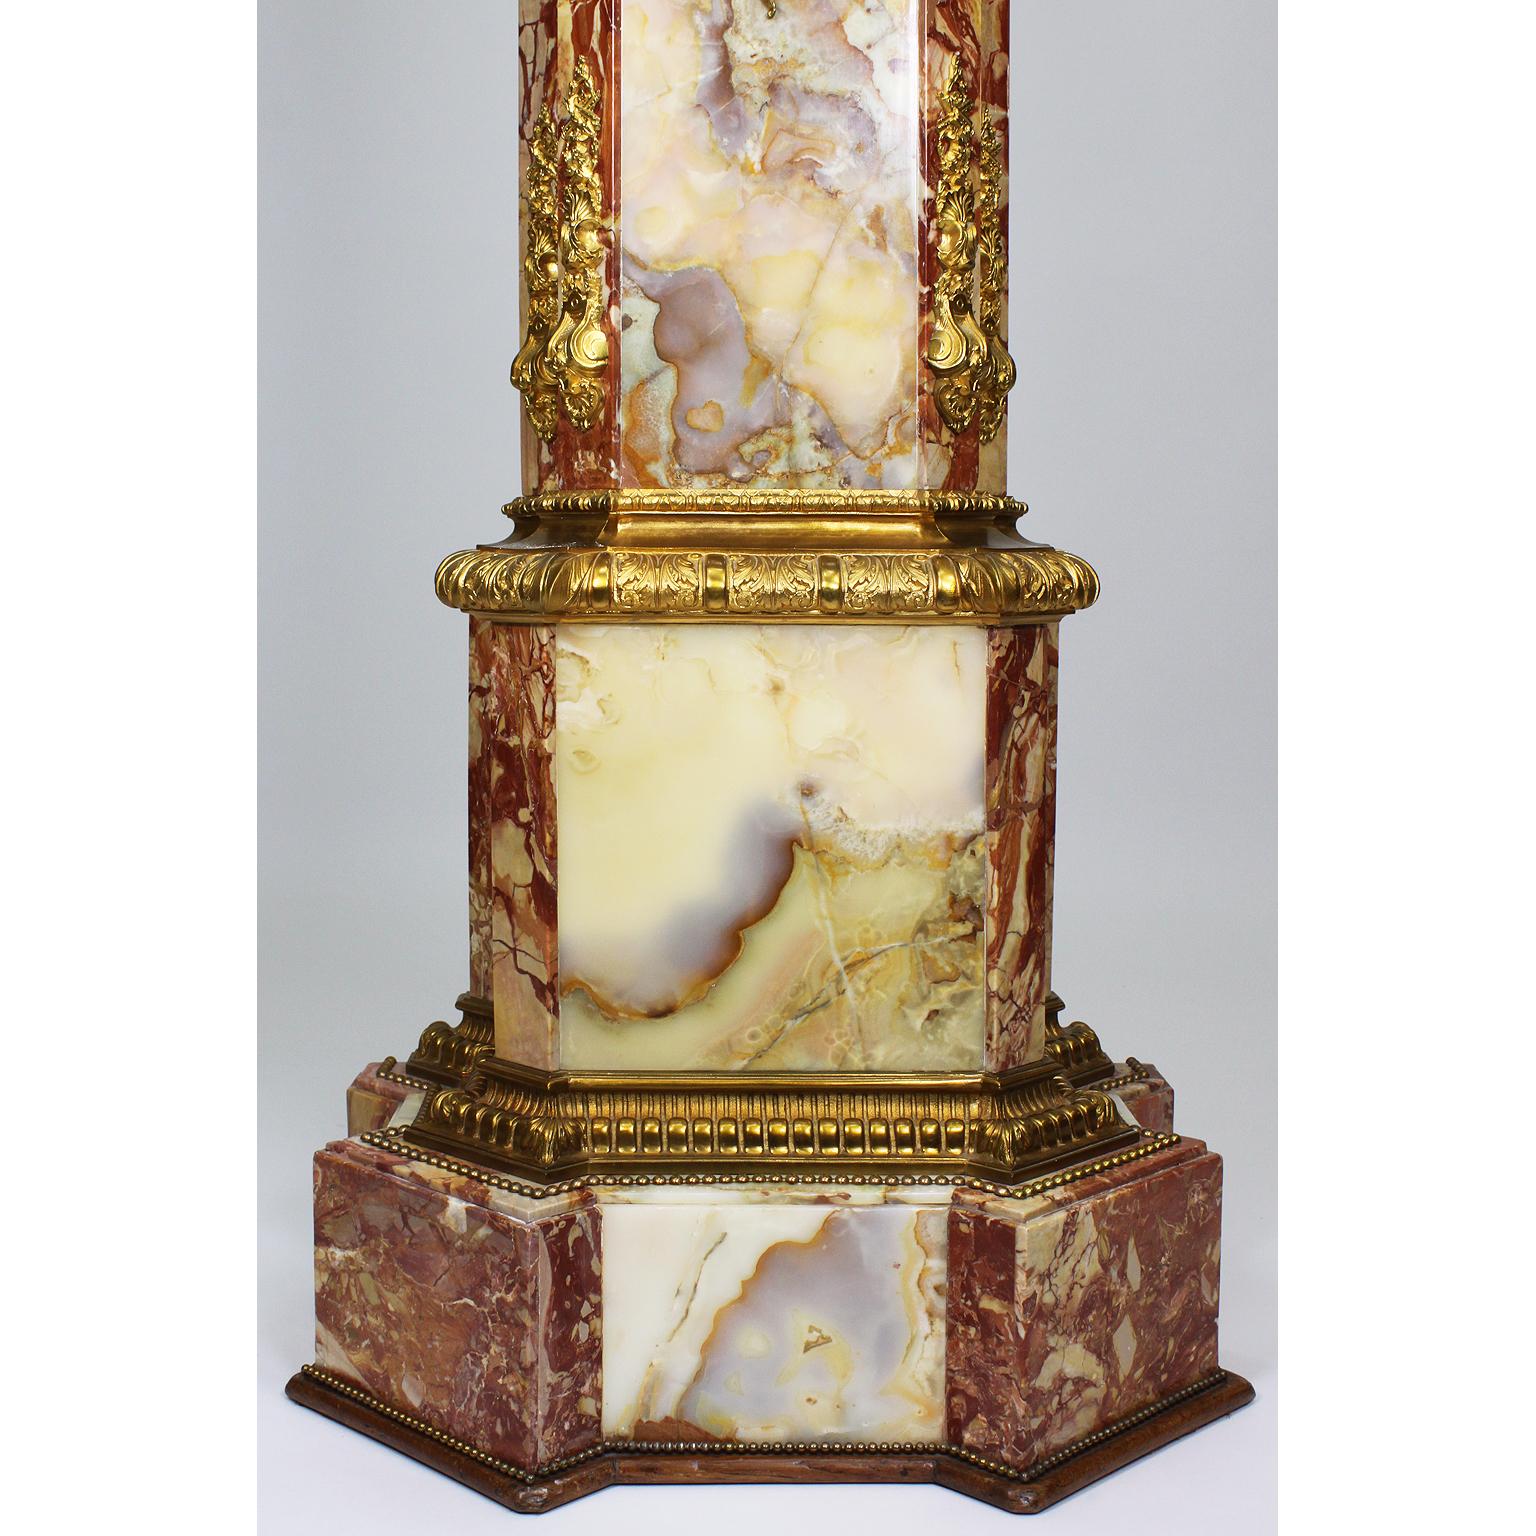 French Monumental 19th Century Ormolu Mounted Onyx & Marble Longcase Grandfather Clock For Sale